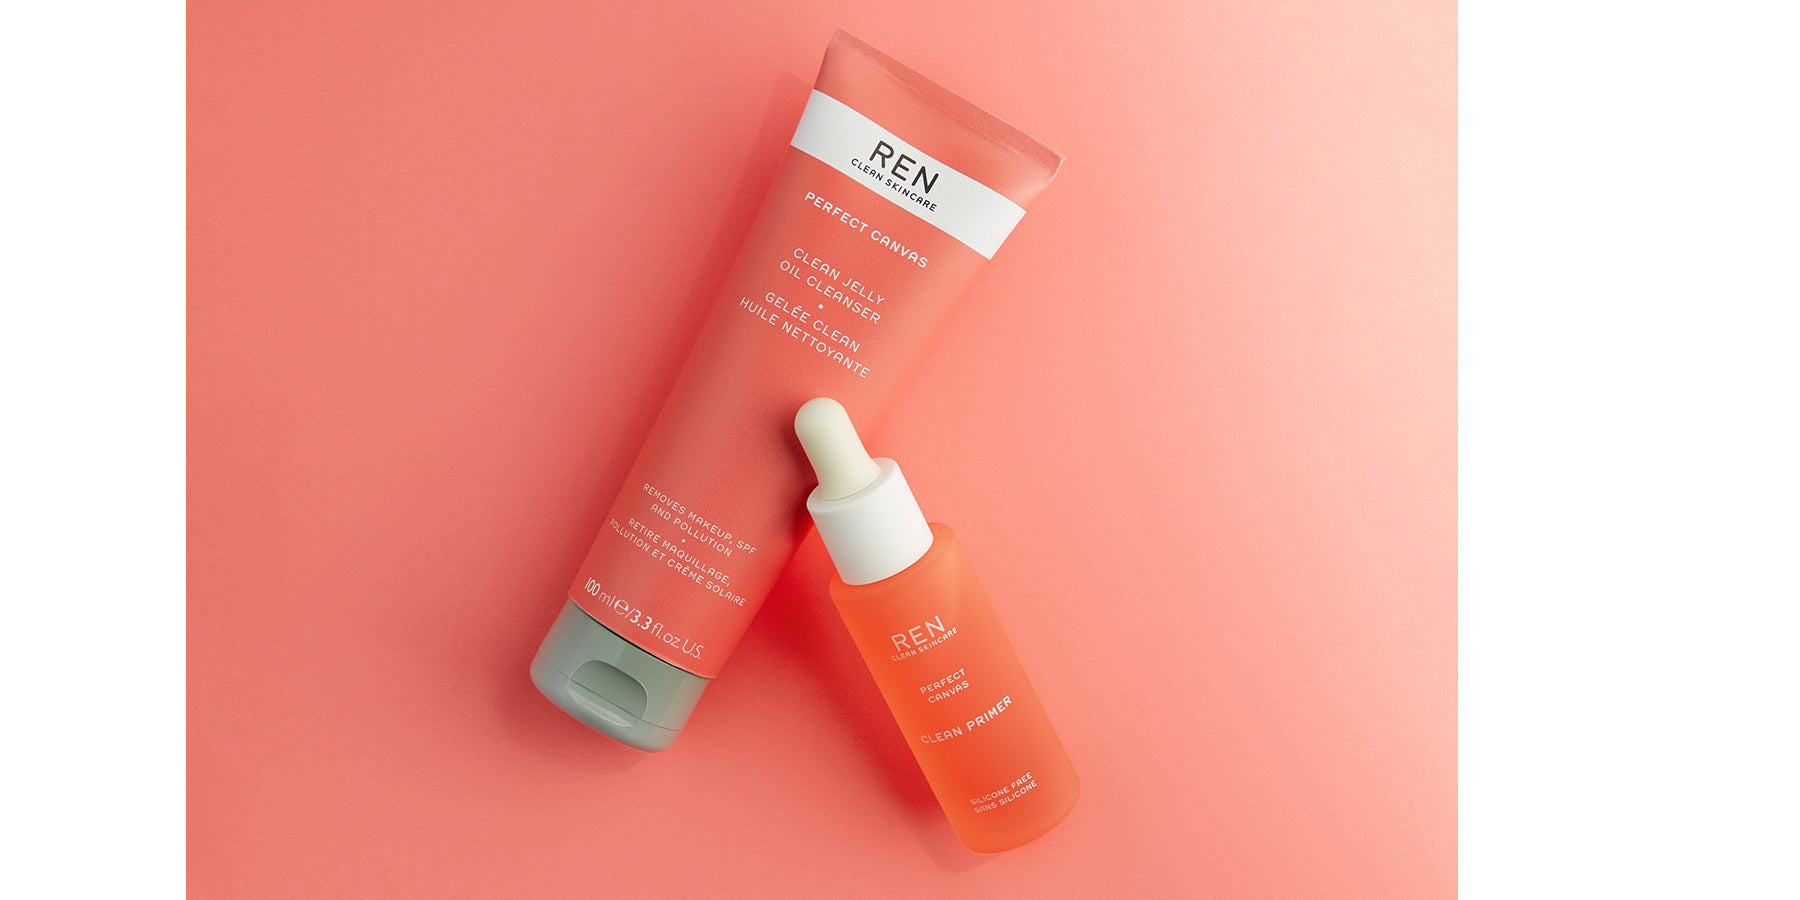 The skin-perfecting partners.